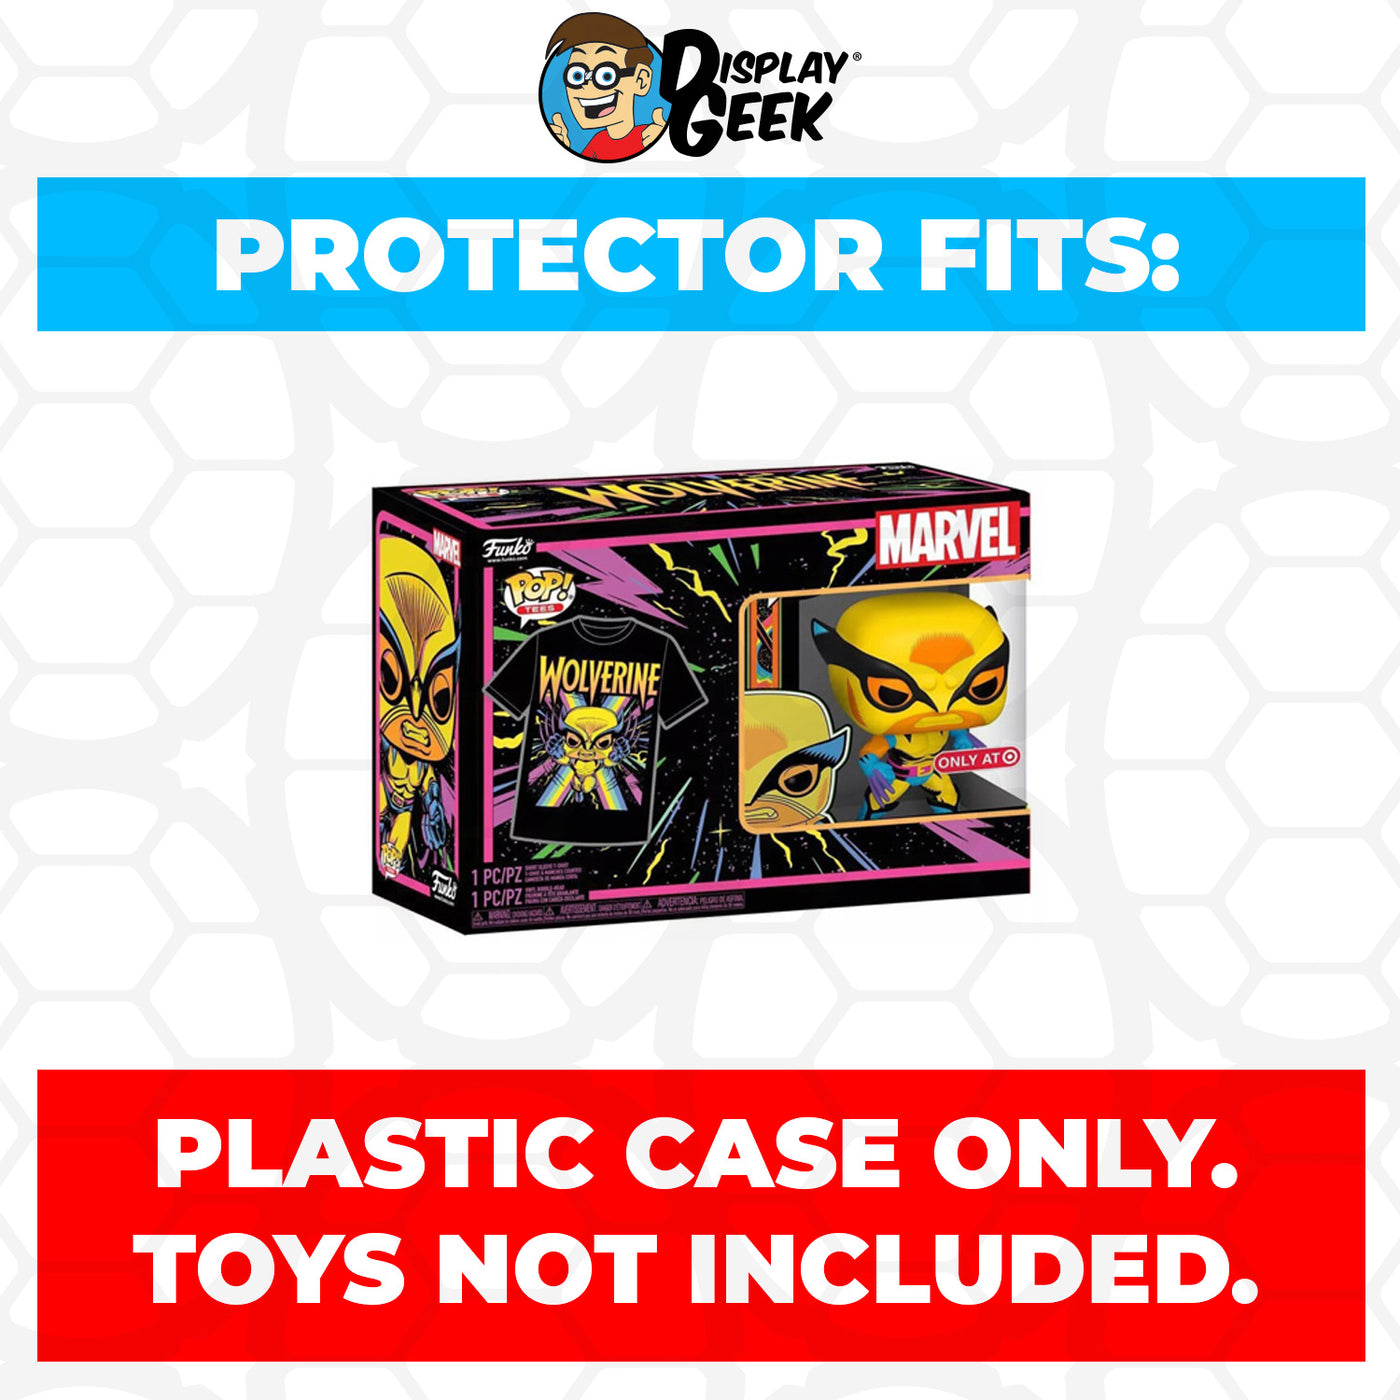 Pop Protector for Pop & Tee Wolverine Blacklight #802 Funko Box on The Protector Guide App by Display Geek